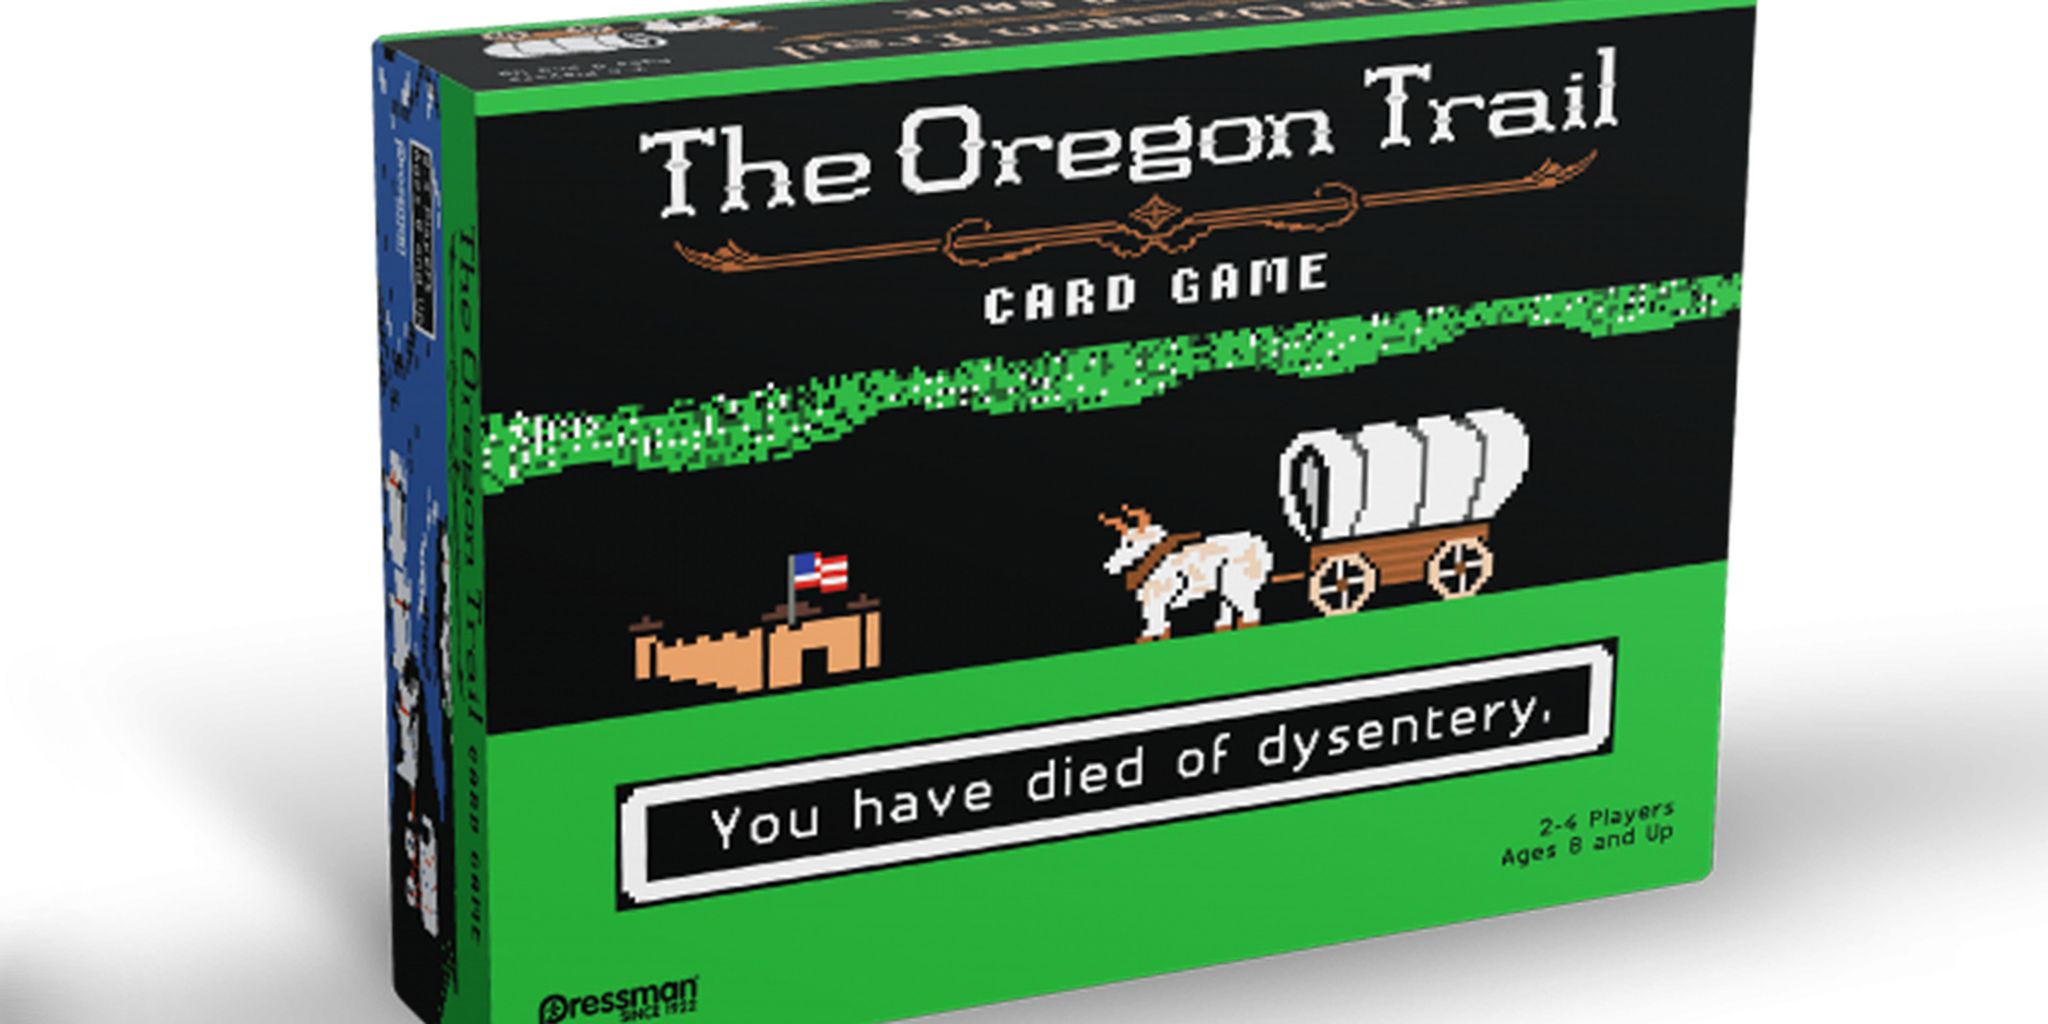 The New Oregon Trail Card Game is Available Now